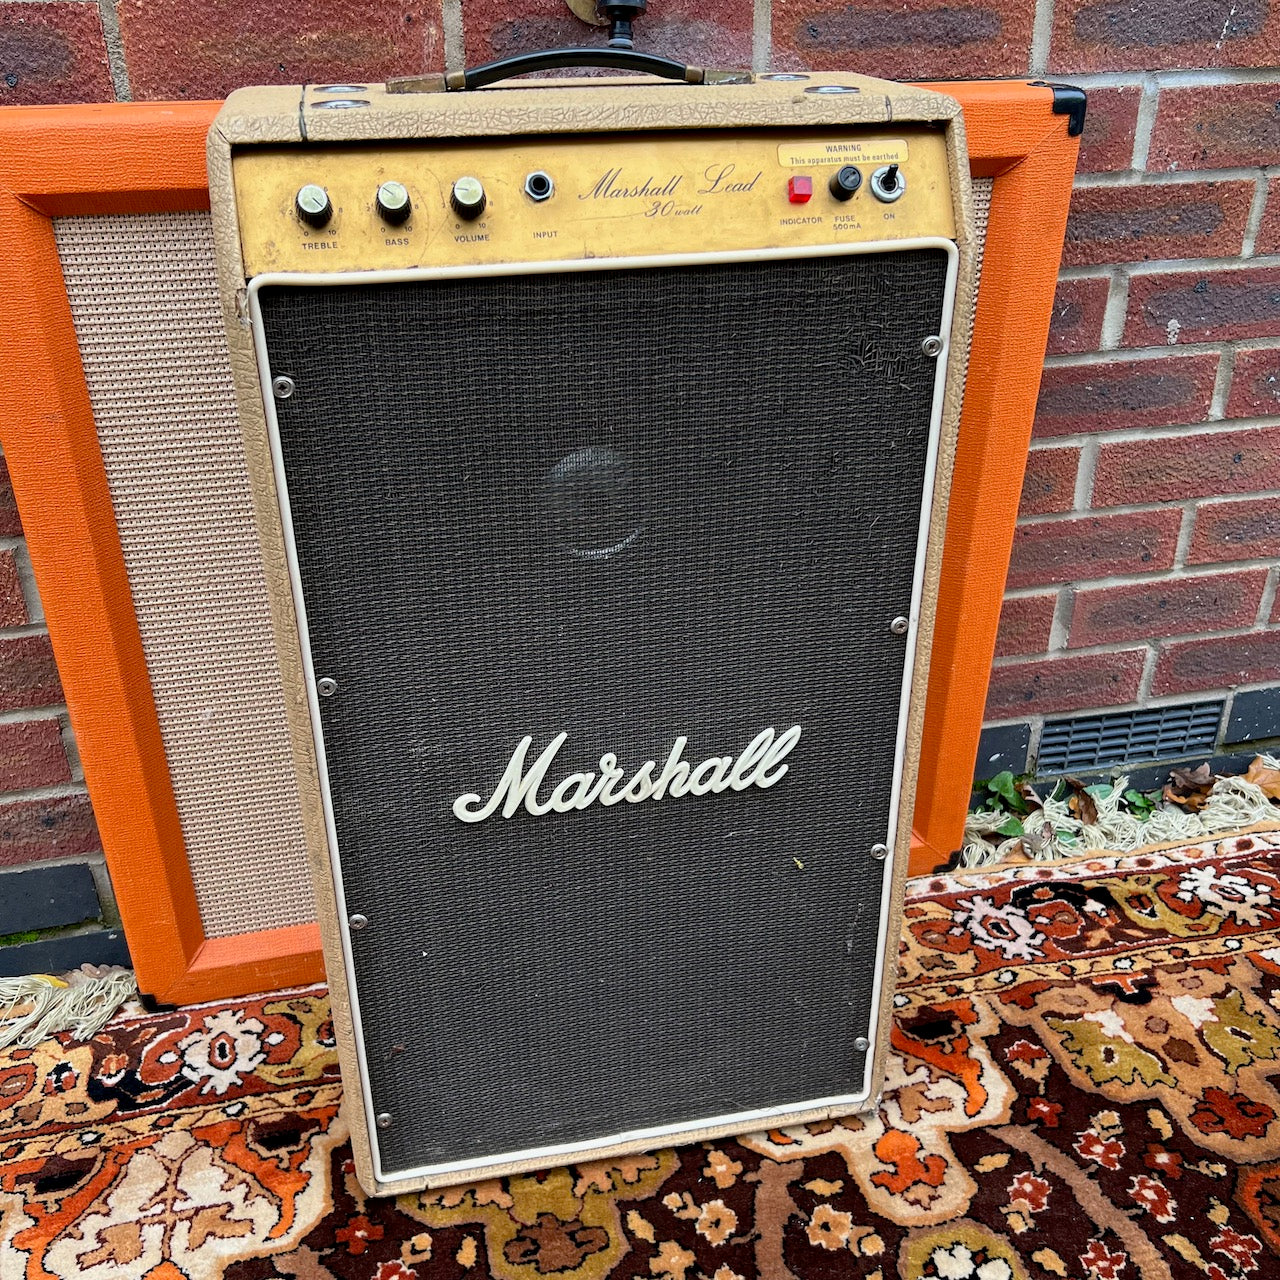 Vintage 1977 Marshall Lead 30 Fawn 2x12 Amplifier Combo LMS